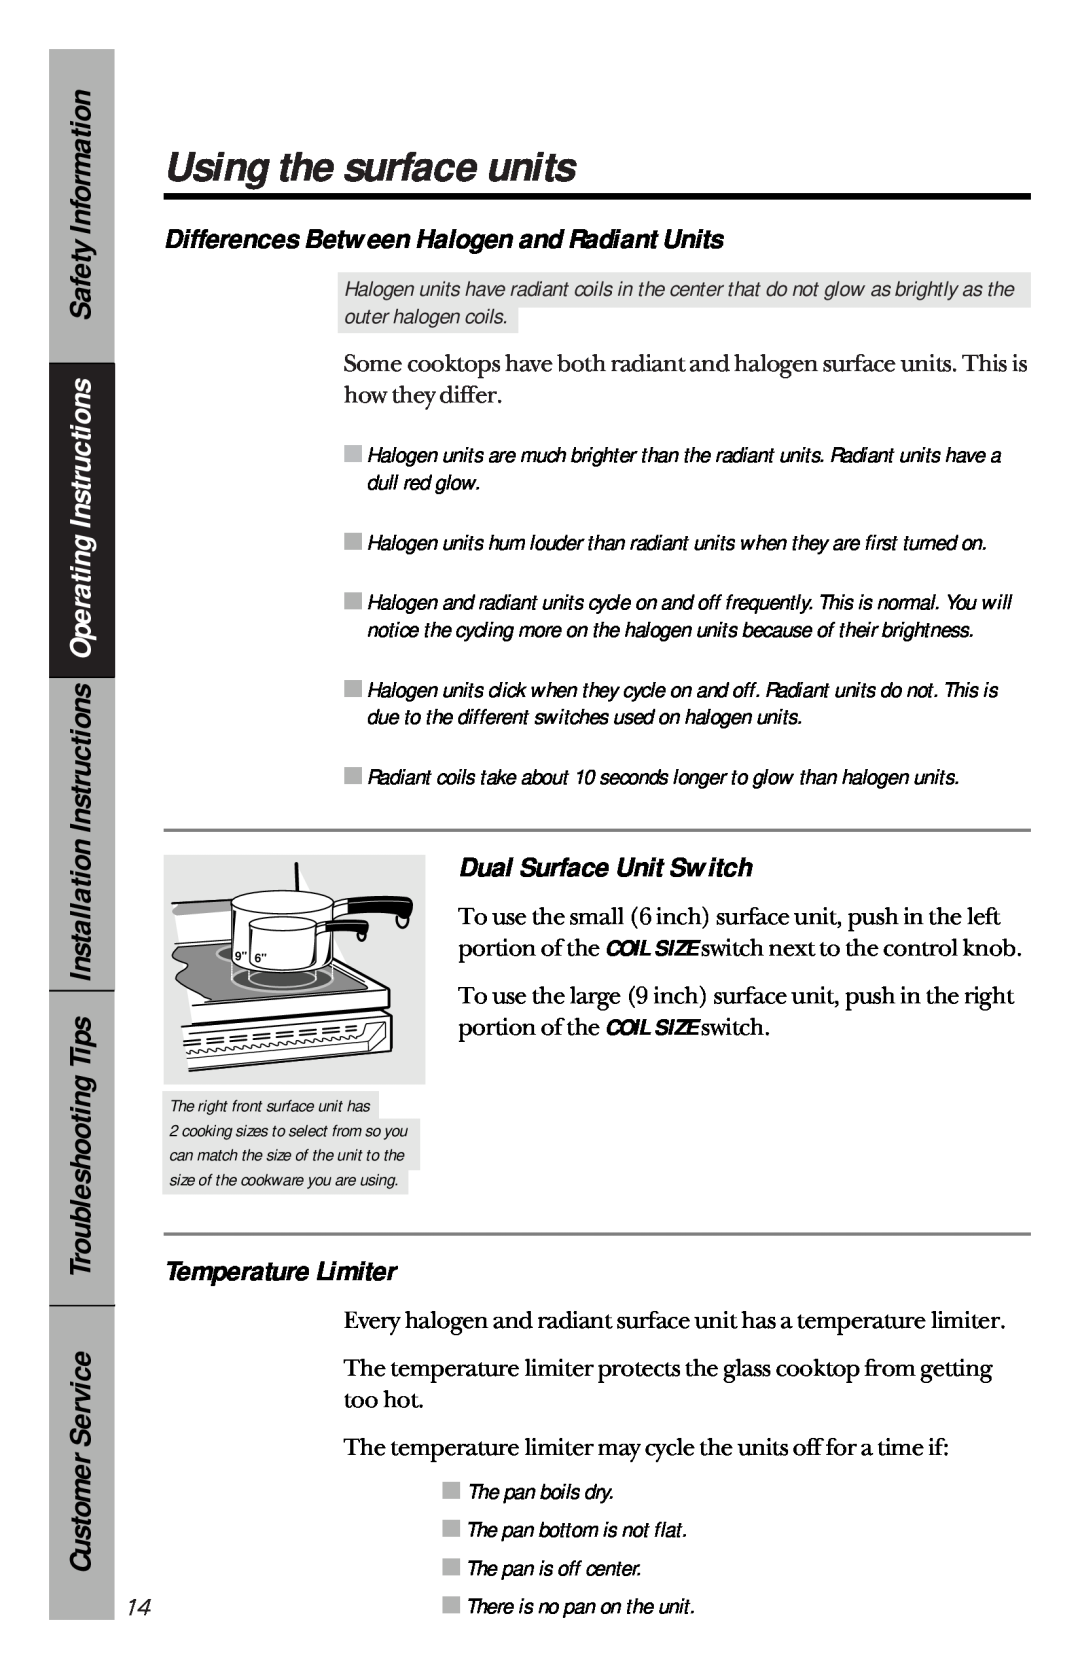 GE 49-8779 Instructions Operating Instructions Safety Information, Differences Between Halogen and Radiant Units, too hot 